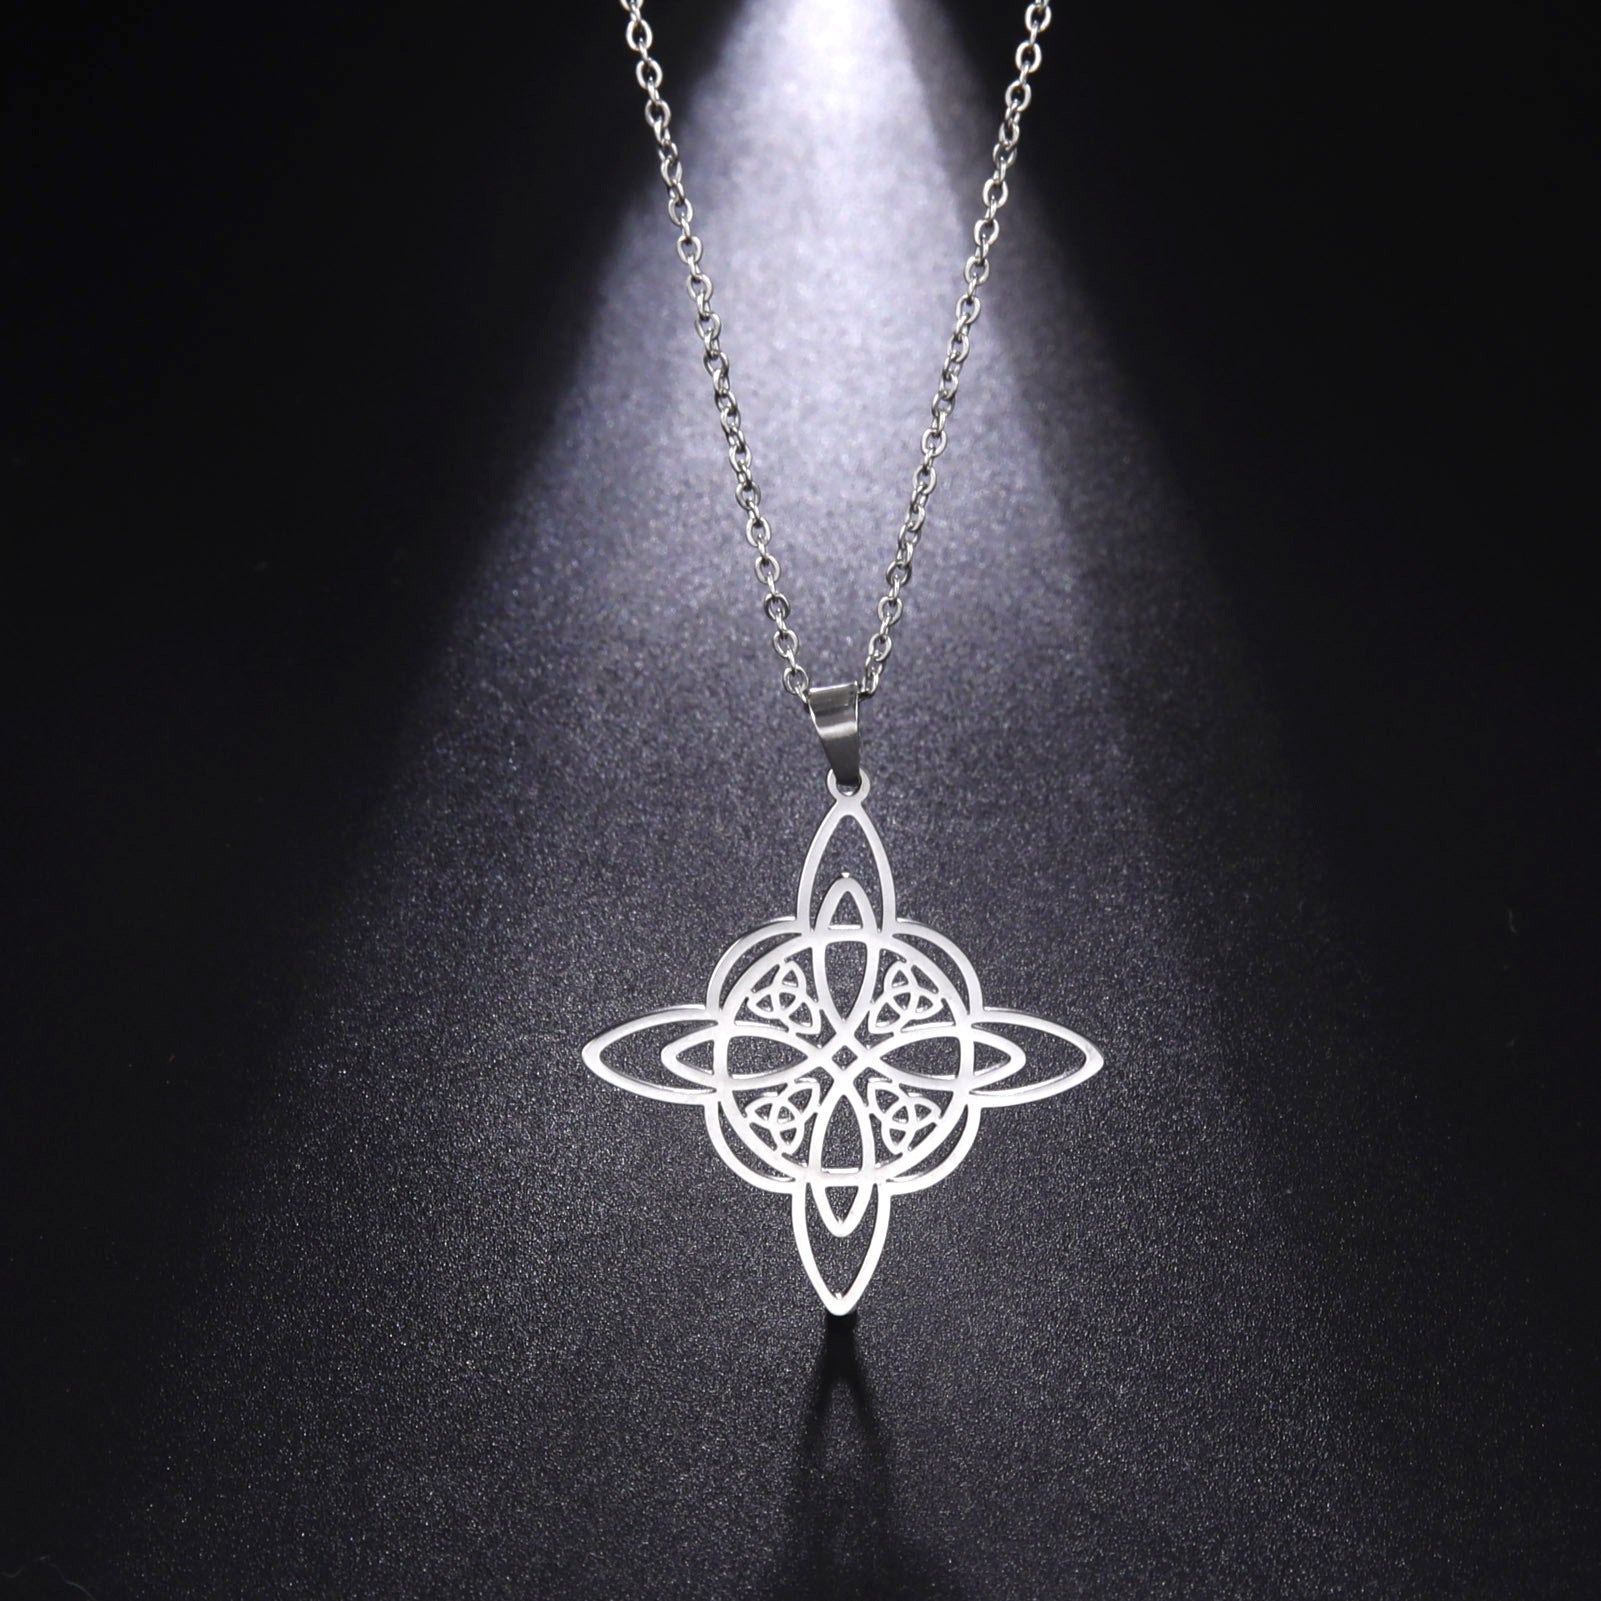 Women's Fashion Material Stainless Steel Necklace